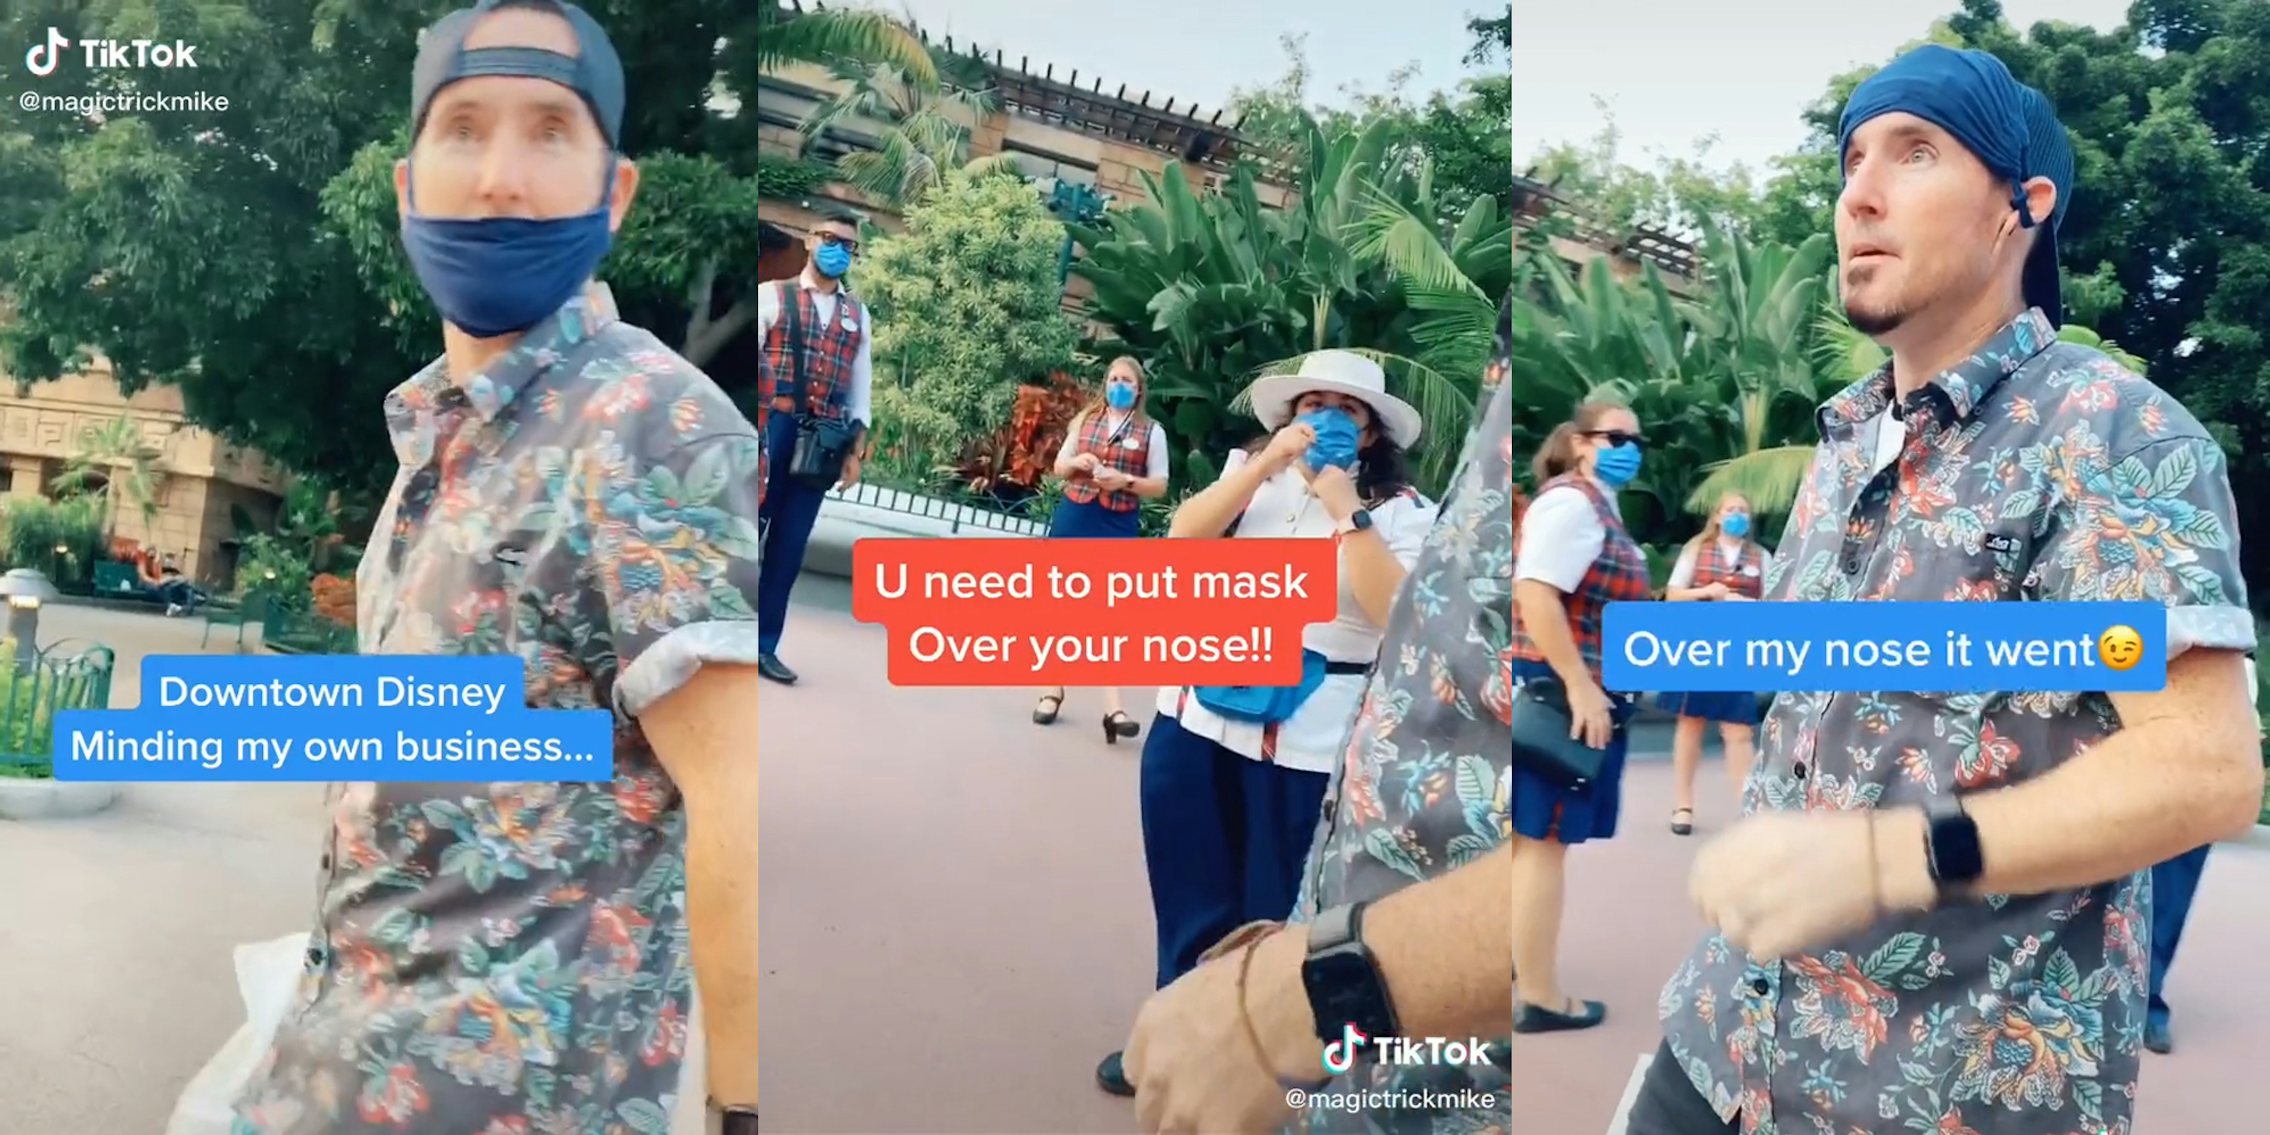 man walks through downtown disney with mask off of nose, takes it off entirely when asked to wear it properly